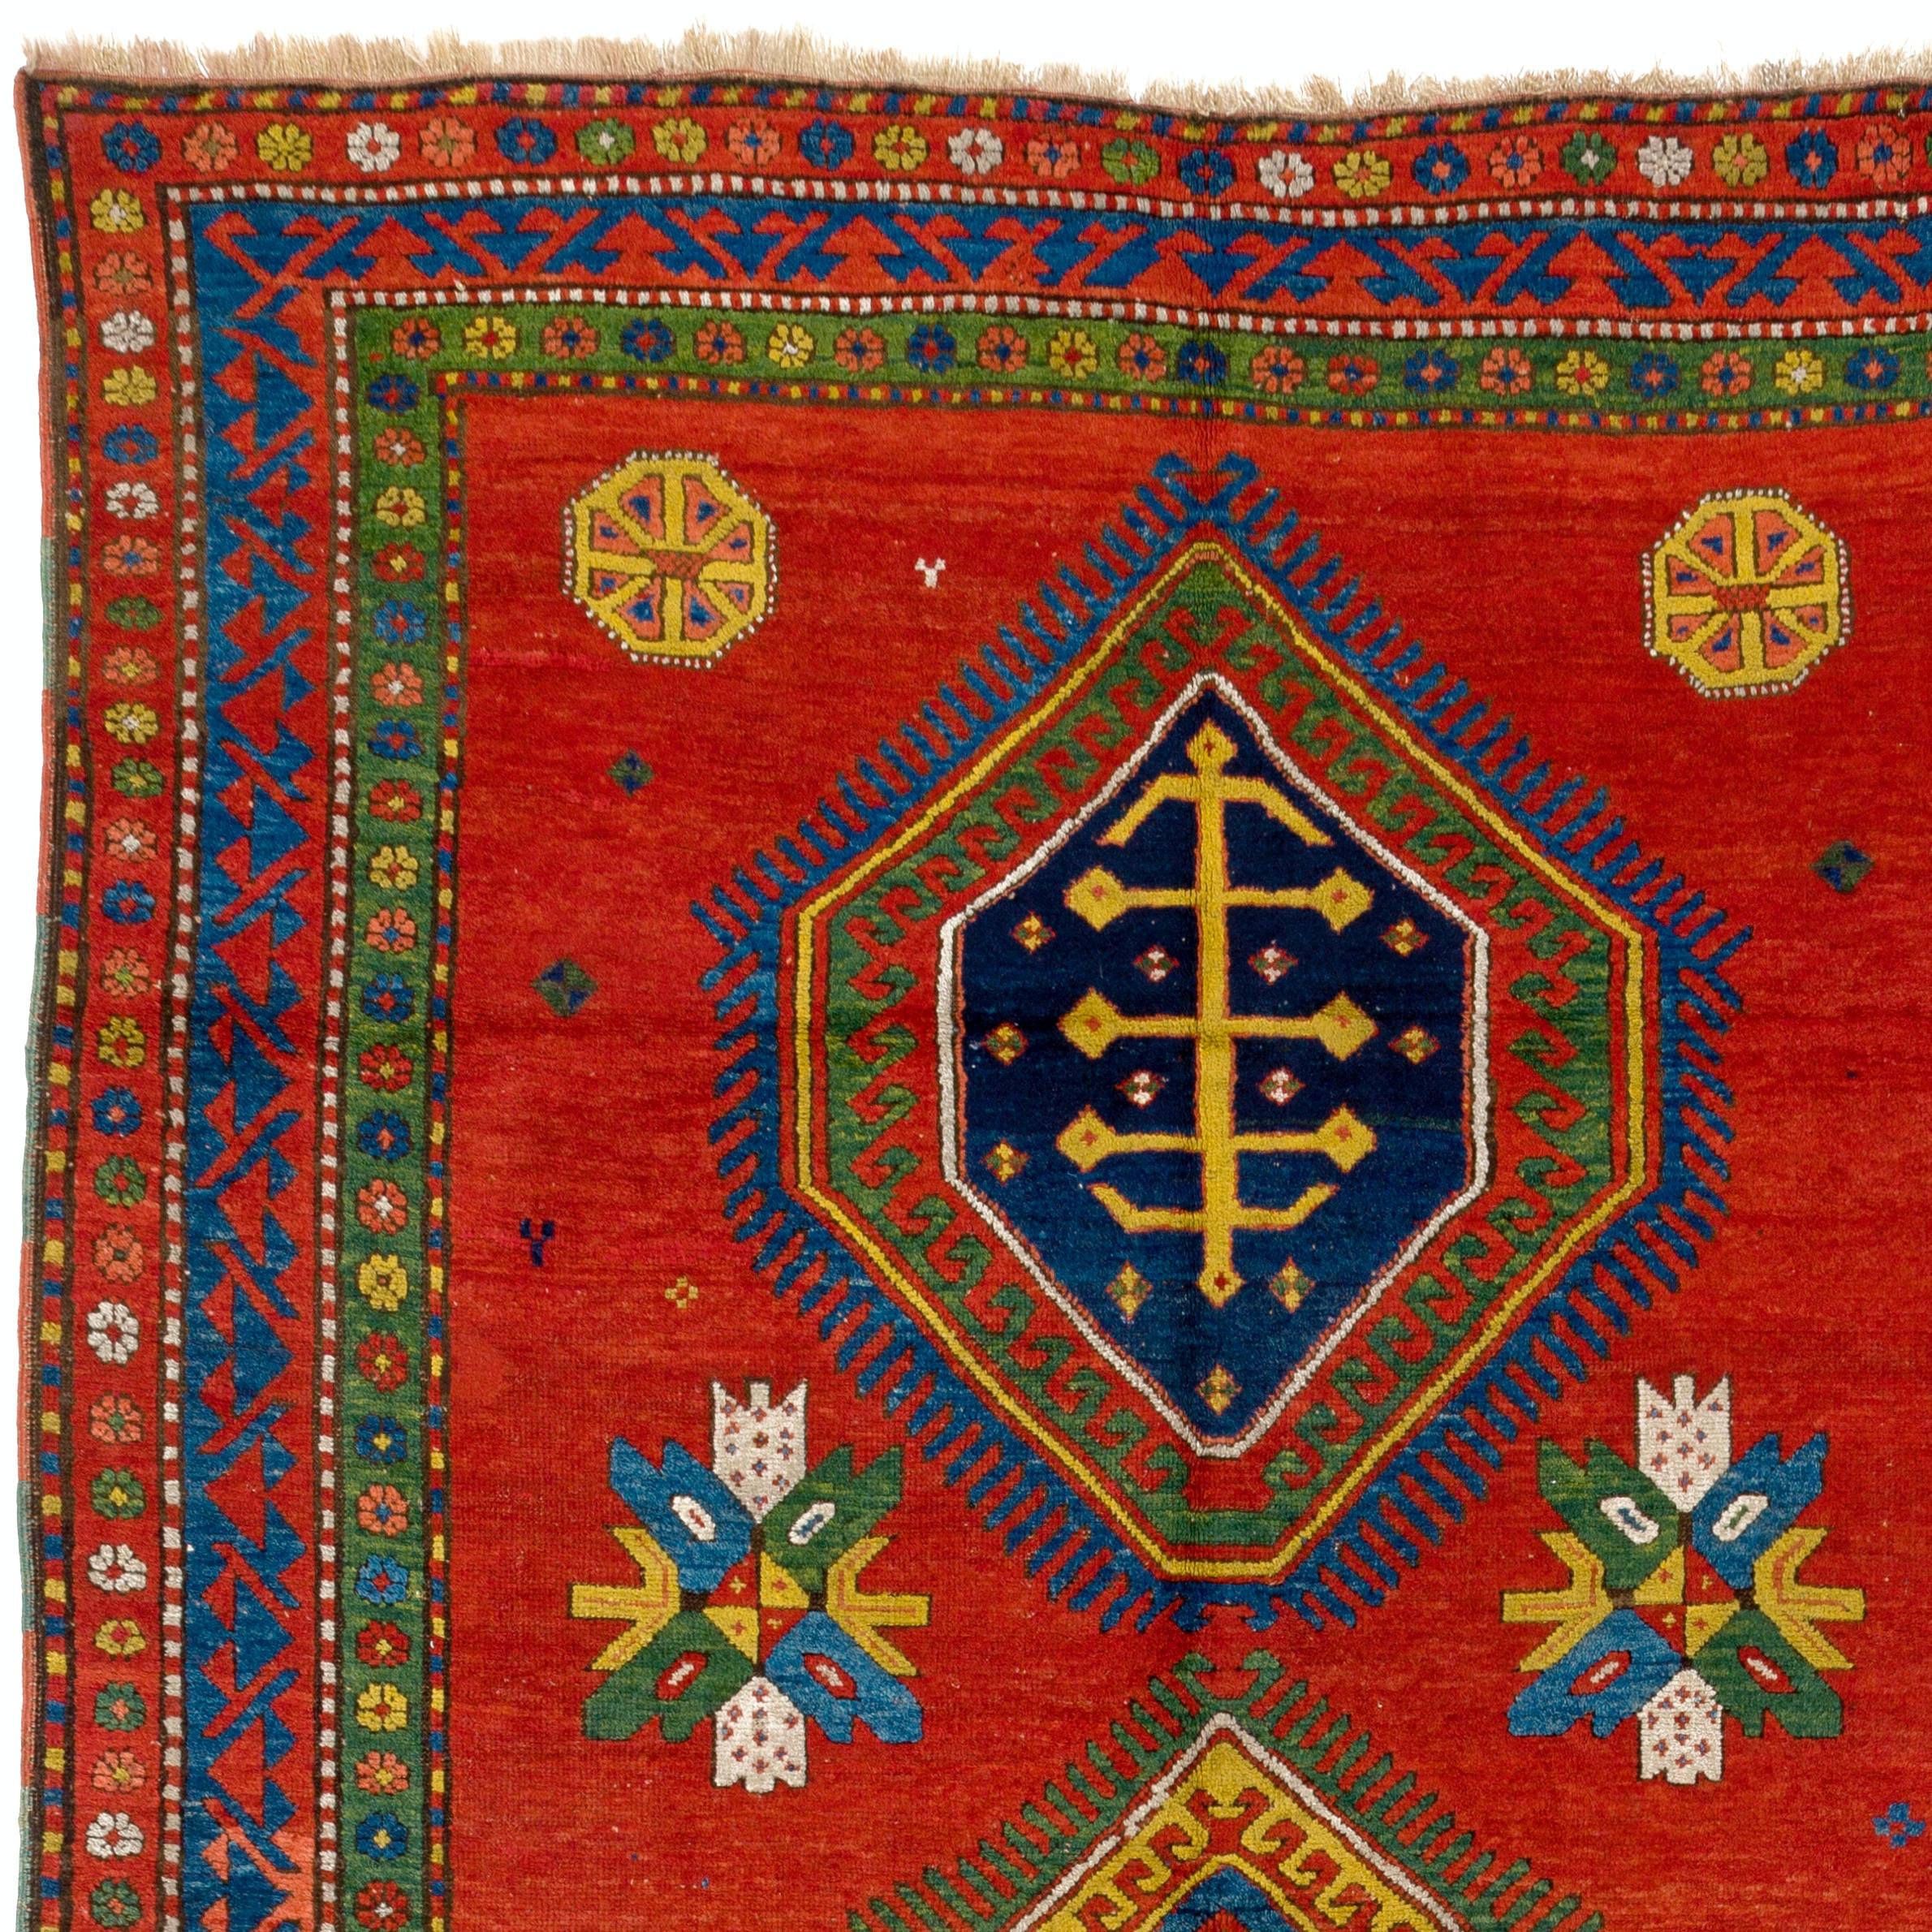 Hand-Knotted 5.6x8.8 Ft Antique Caucasian Armenian Kazak Rug, Ca 1900. Striking Natural Dyes For Sale